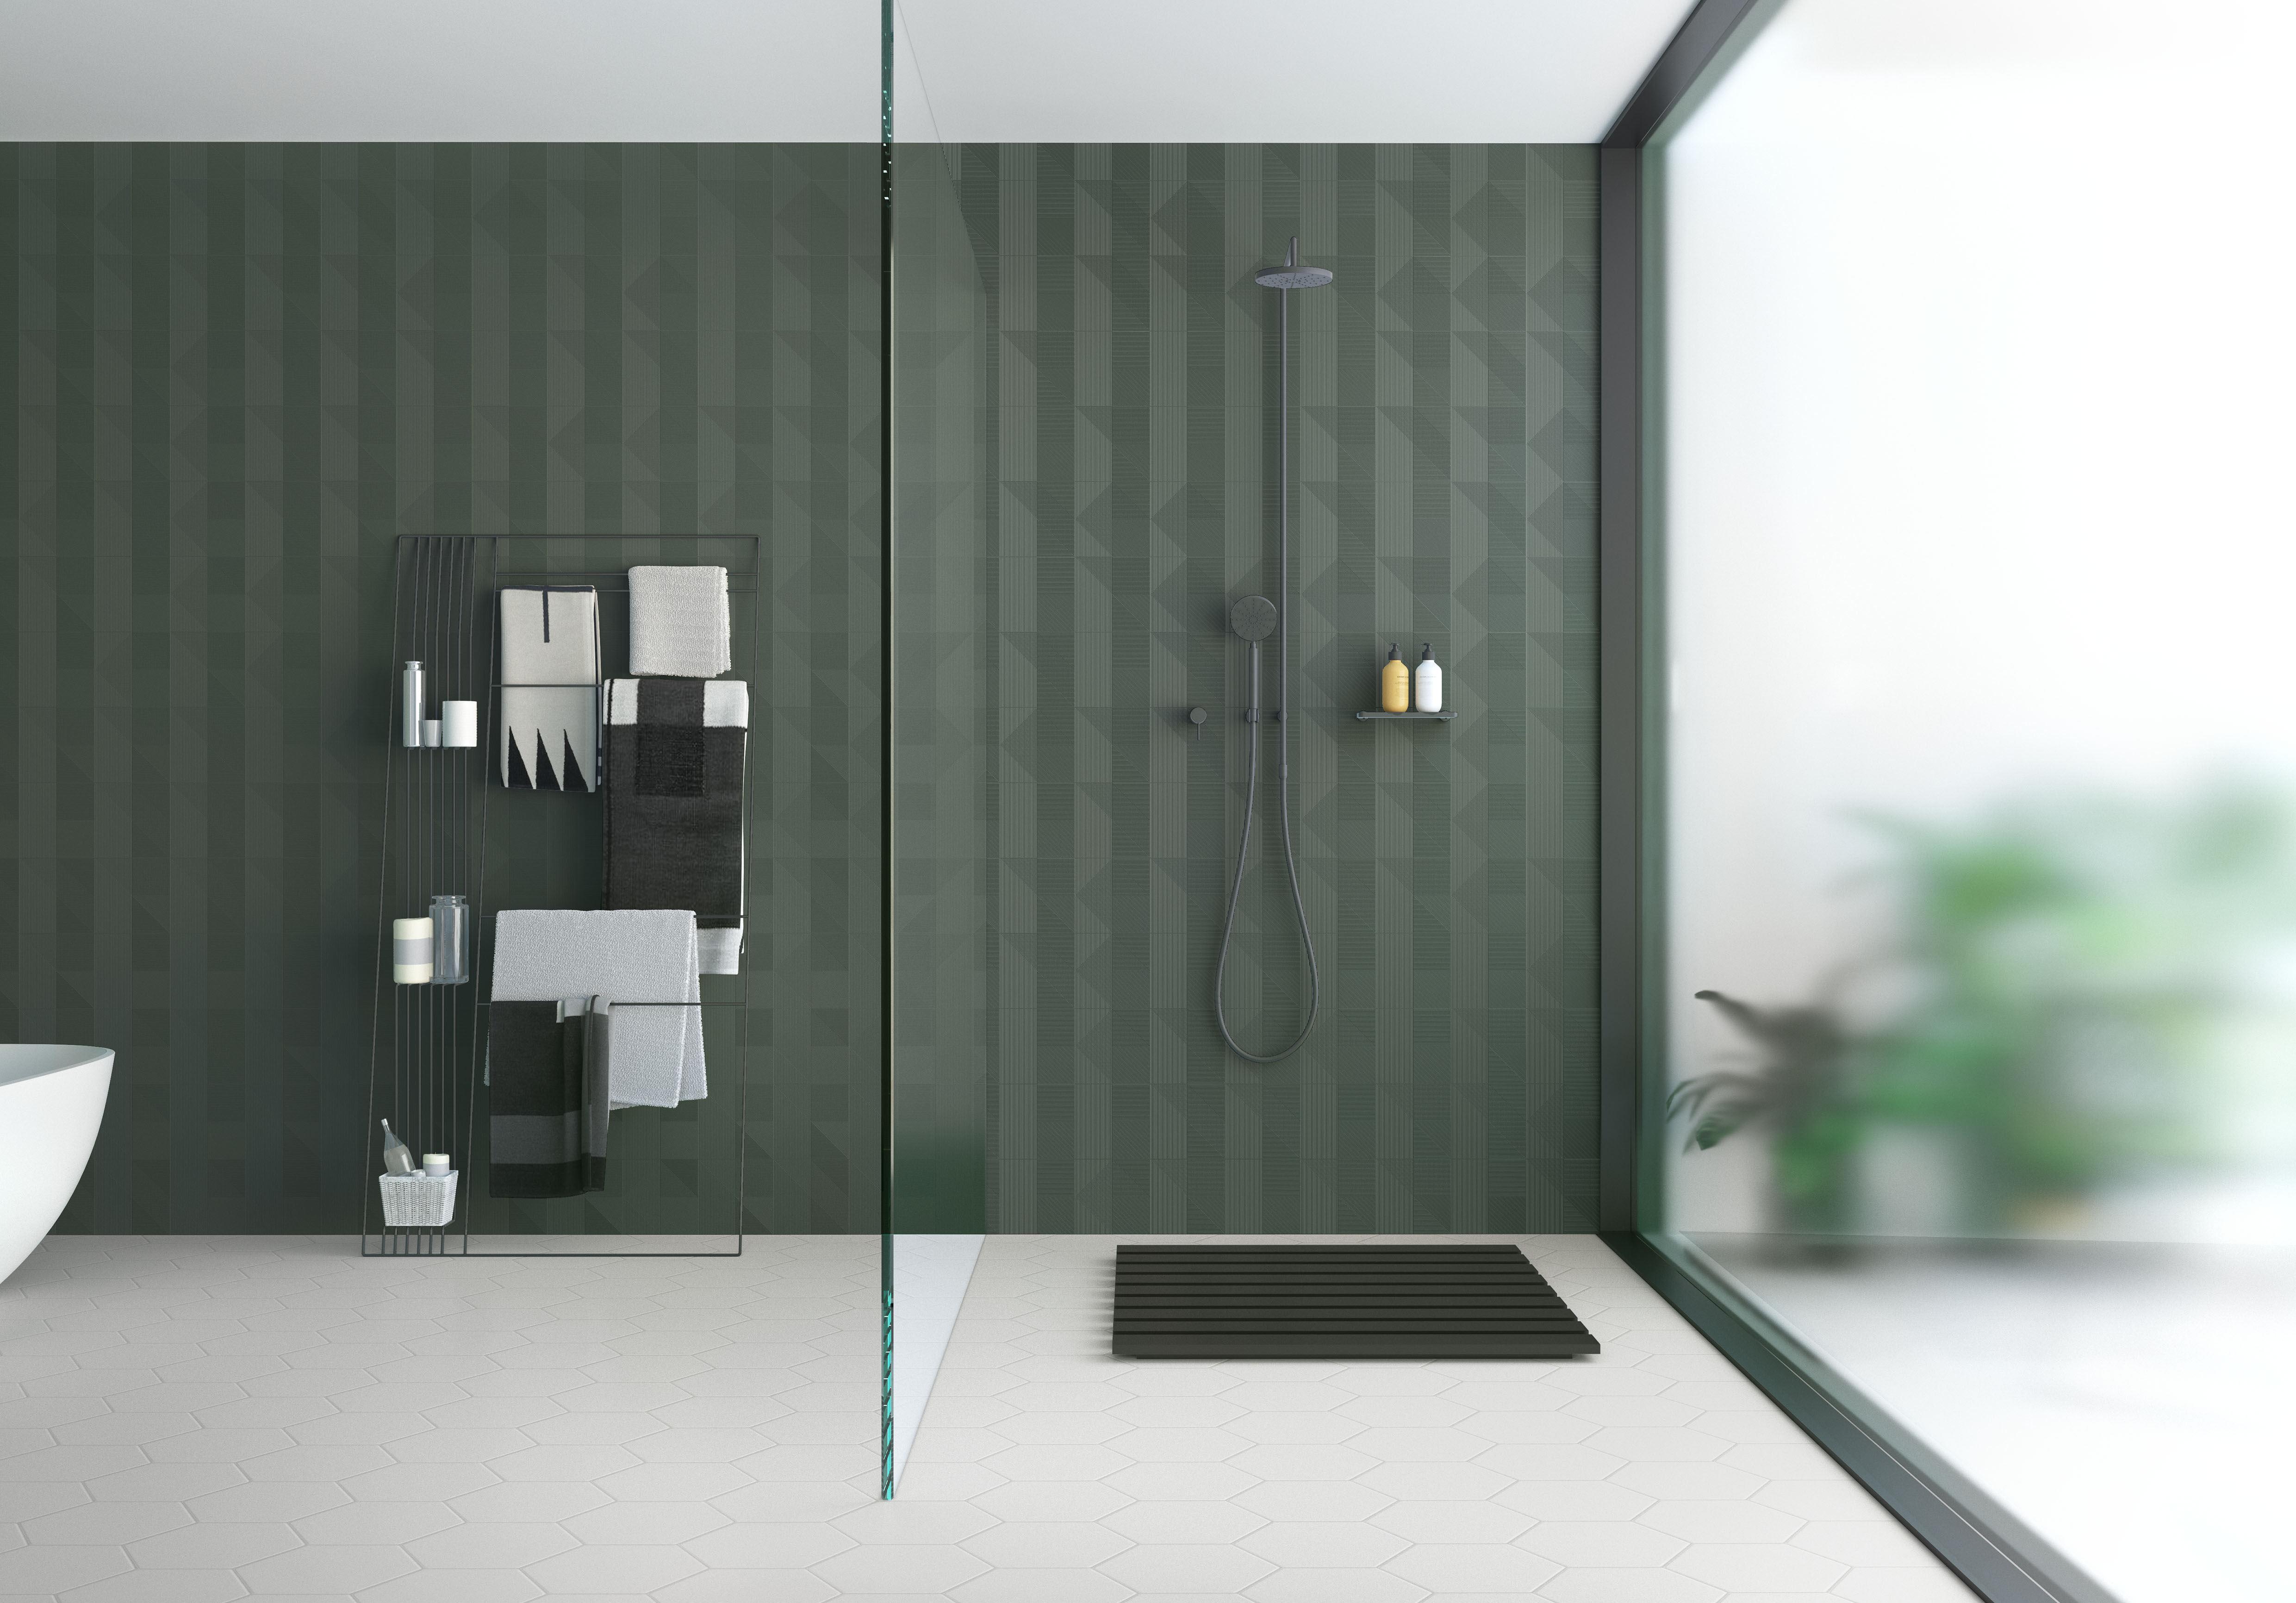 A bathroom whose star feature are its textured wall tiles, designed by Yonoh for Harmony. 